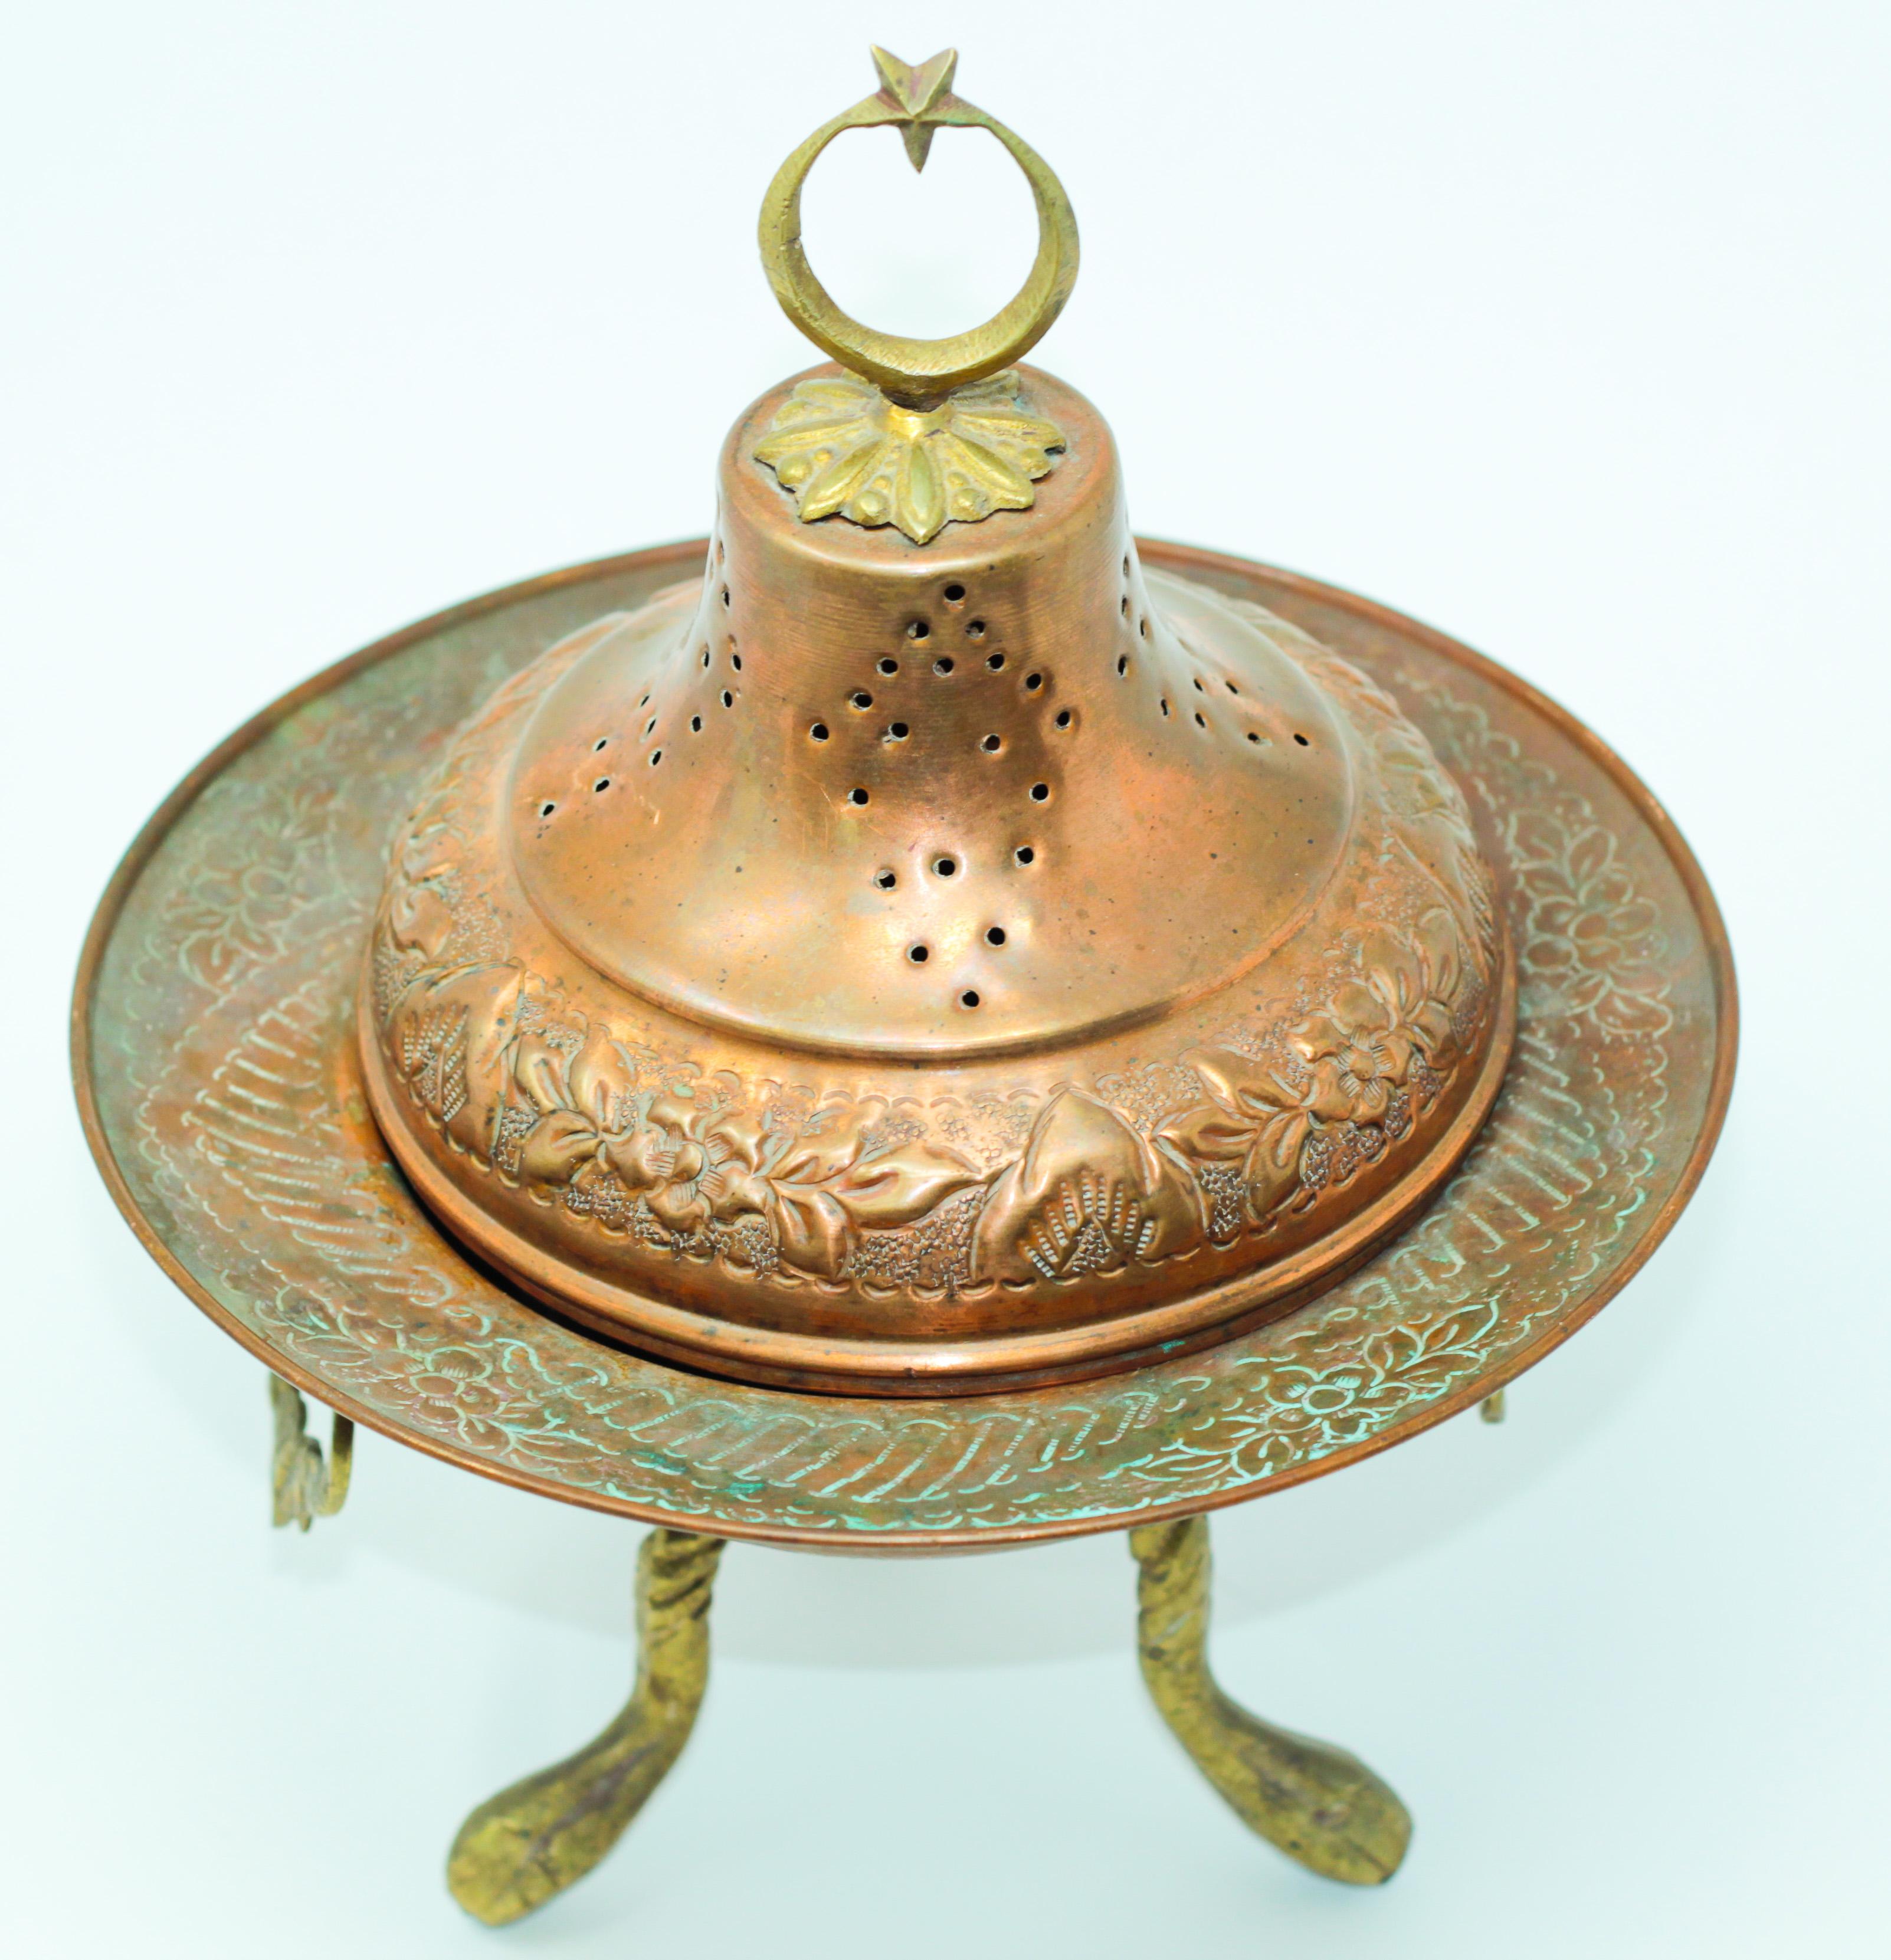 Footed antique Middle Eastern incense burner with pierced copper and brass ornamentation.
The lid is decorated with a crescent moon and star brass final.
Functional and beautifully adorned, complete with lid.
The footed copper bottom bowl with